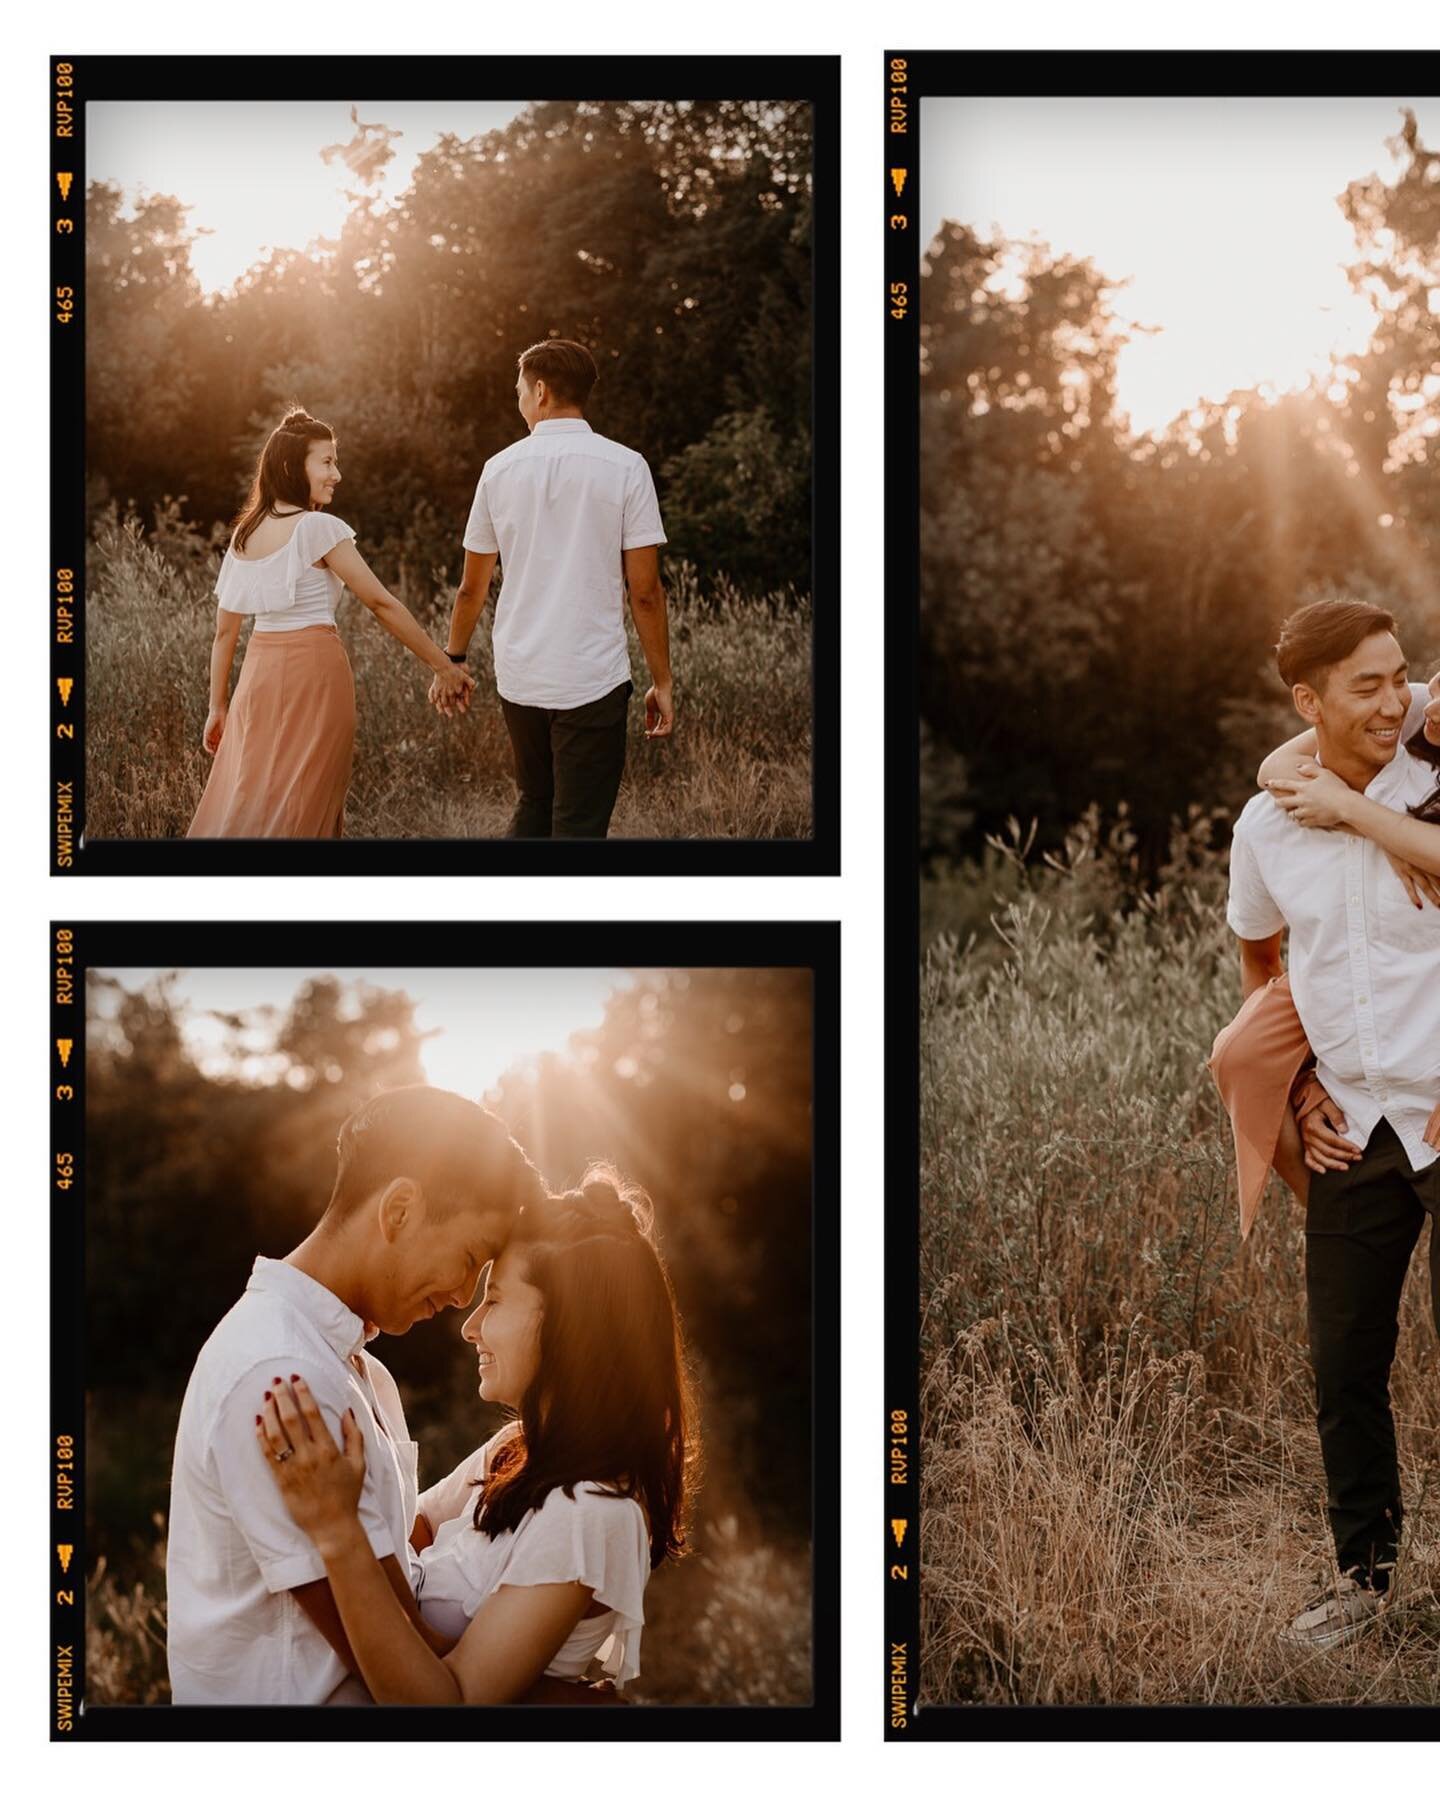 DM me to book an outdoor couples&rsquo; mini session!